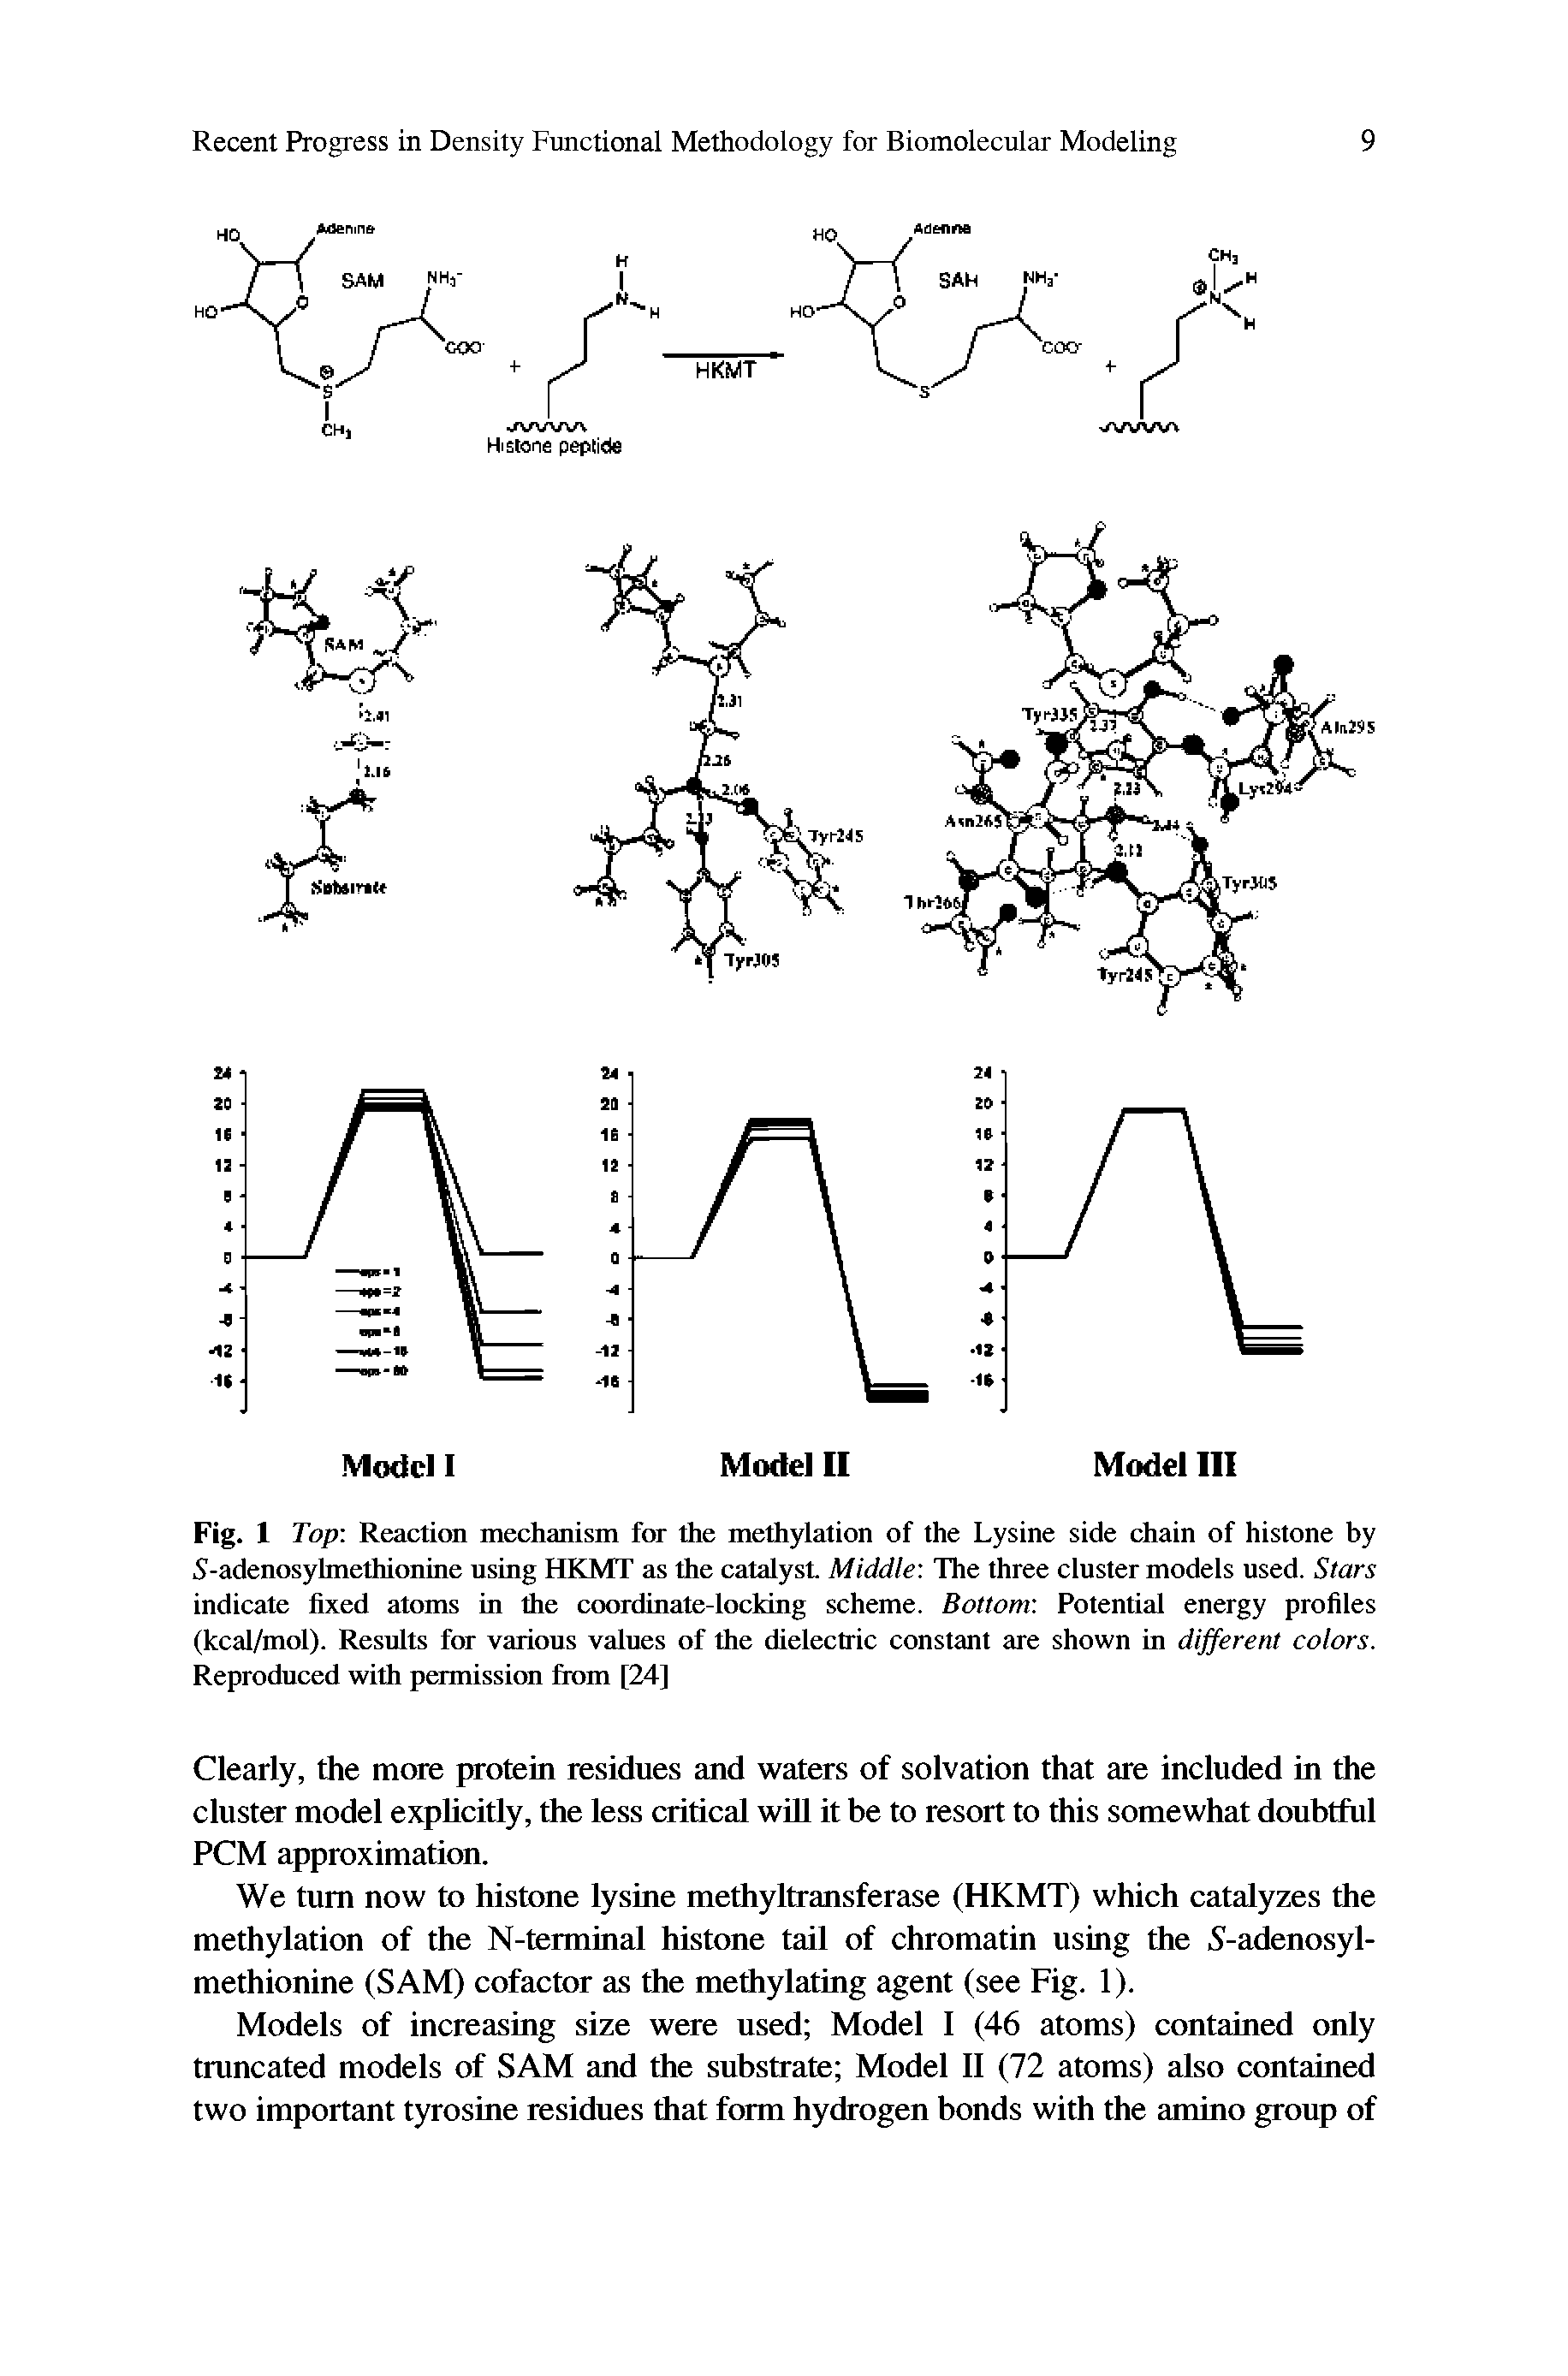 Fig. 1 Top Reaction mechanism for the methylation of the Lysine side chain of histone by 5-adenosyhnethionine using HKMT as the catalyst Middle The three cluster models used. Stars indicate fixed atoms in the coordinate-locking scheme. Bottom Potential energy profiles (kcal/mol). Results for various values of the dielectric constant are shown in different colors. Reproduced with permission from [24]...